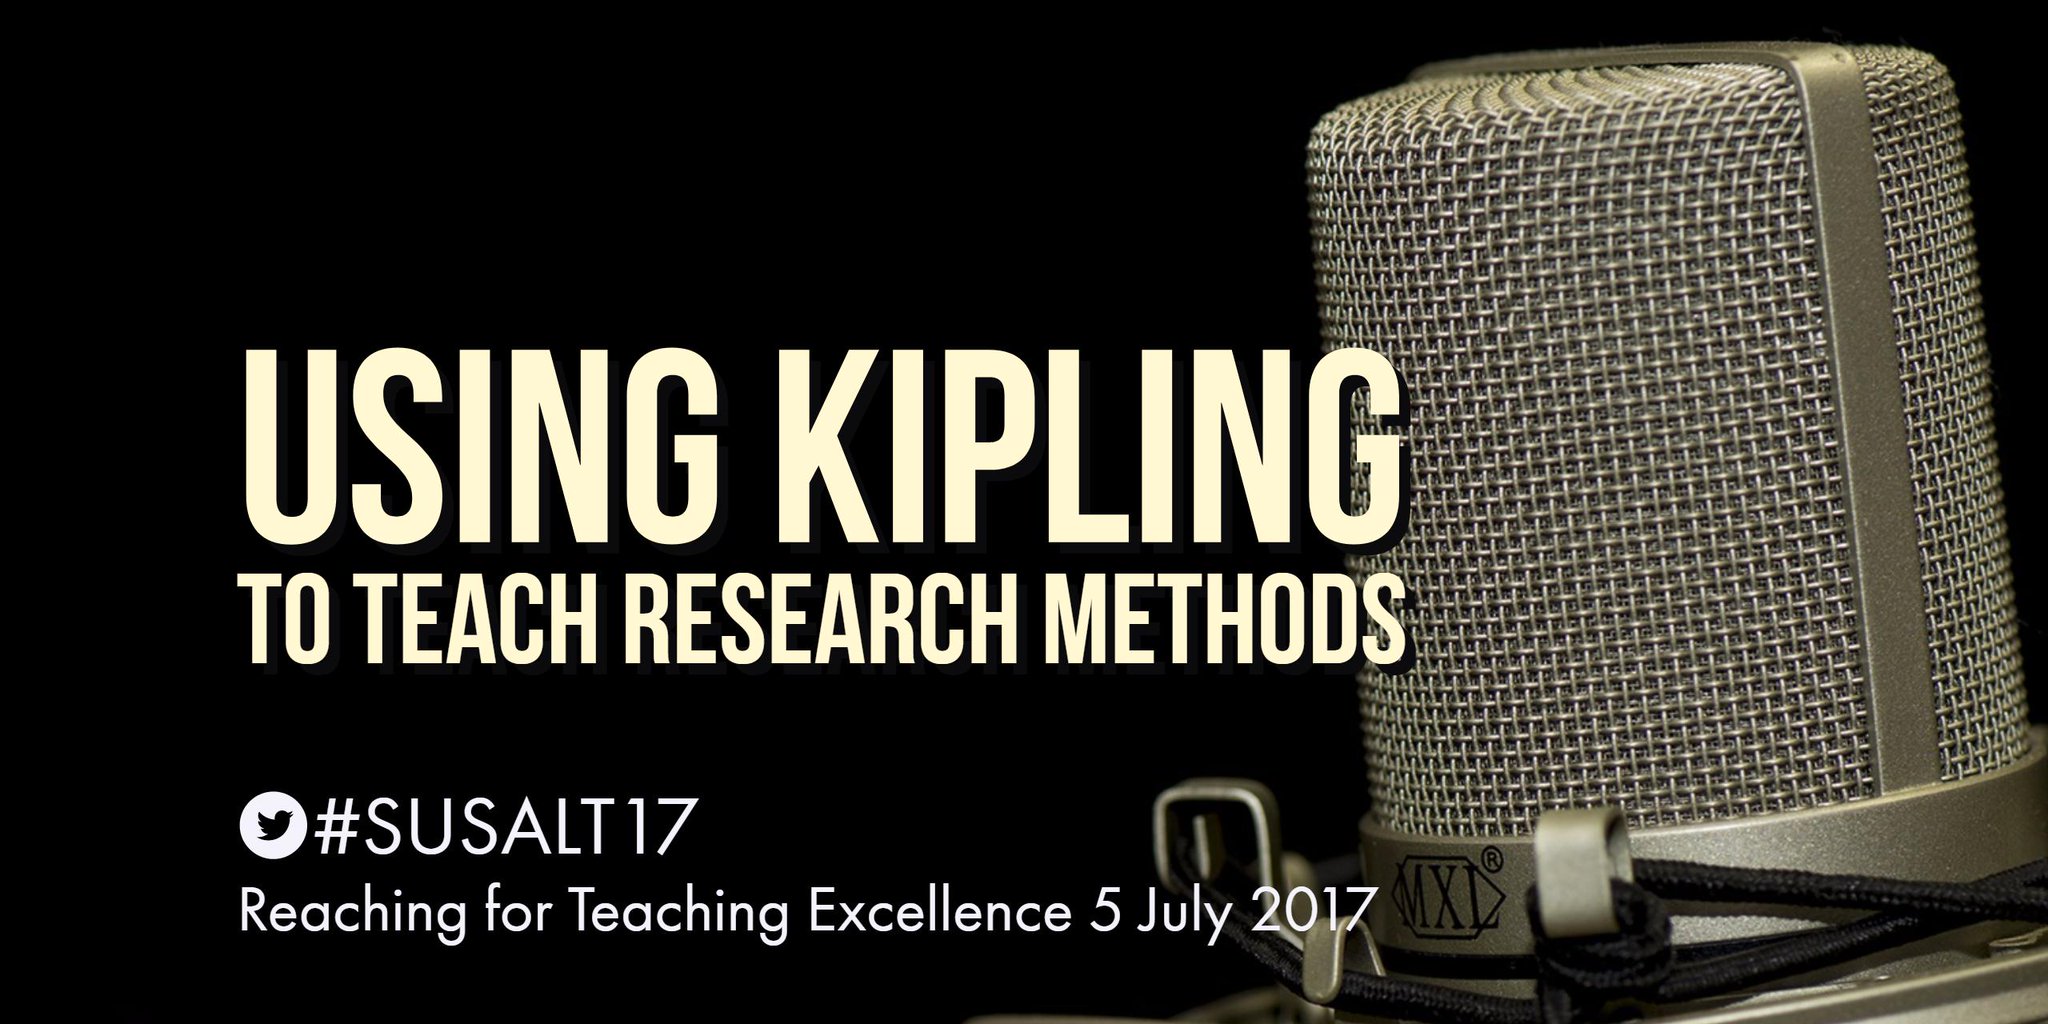 The session from @hodges_hr on Using Kipling to Teach Research Methods looks fab #susalt17 !https://t.co/LqwOL4Dzrm https://t.co/RDcOTAsMyG